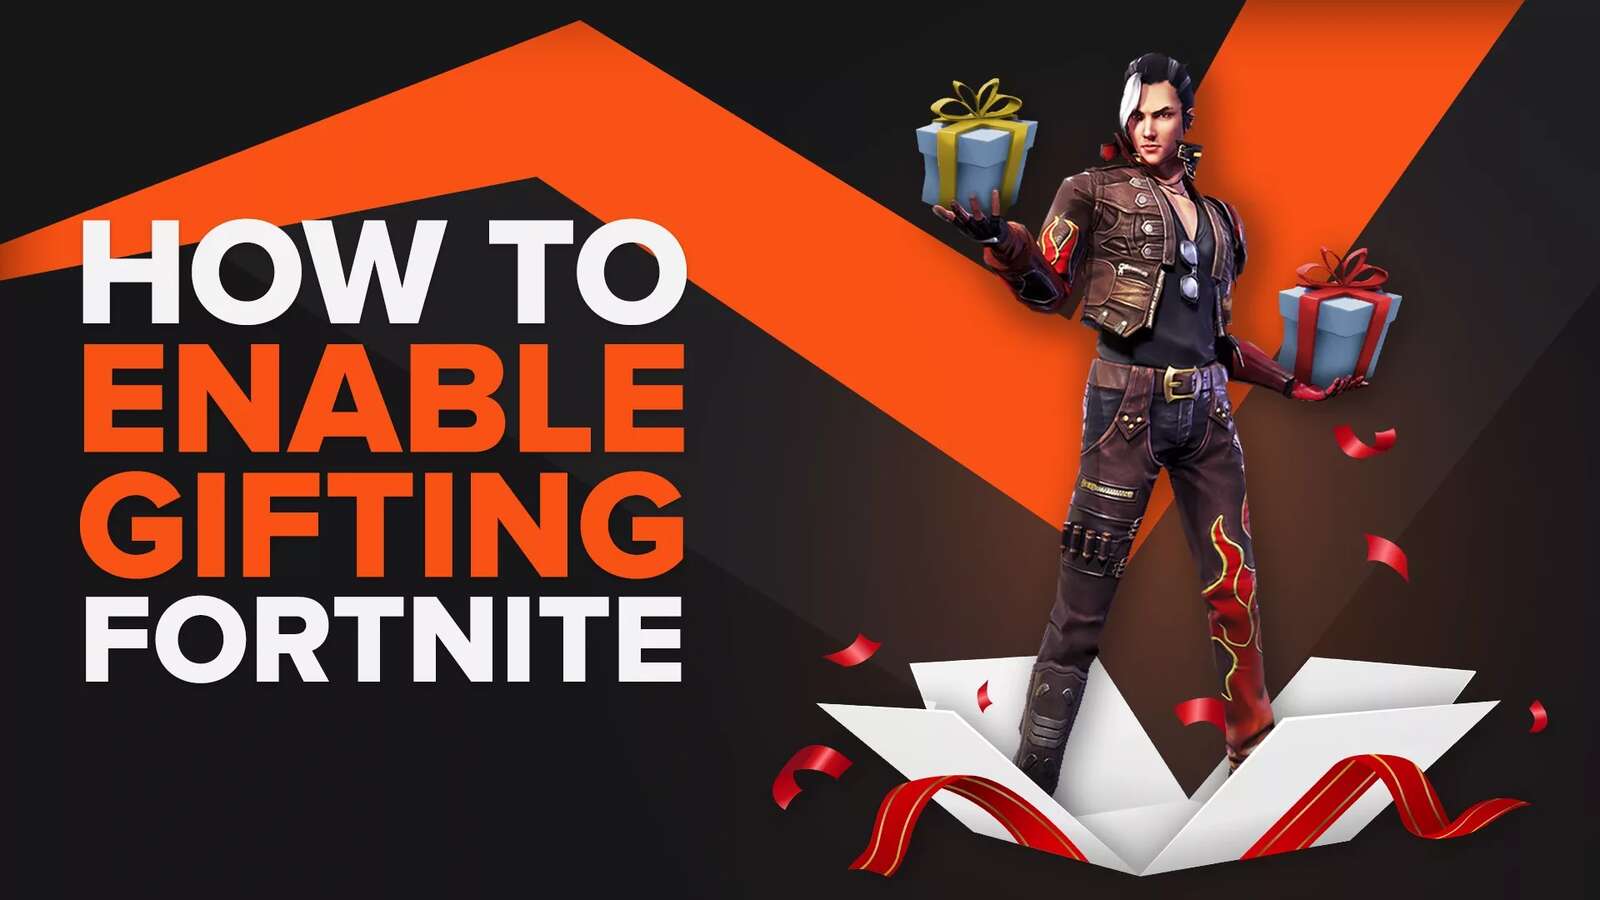 How to Enable Gifting in Fortnite [Explained Step-by-Step]